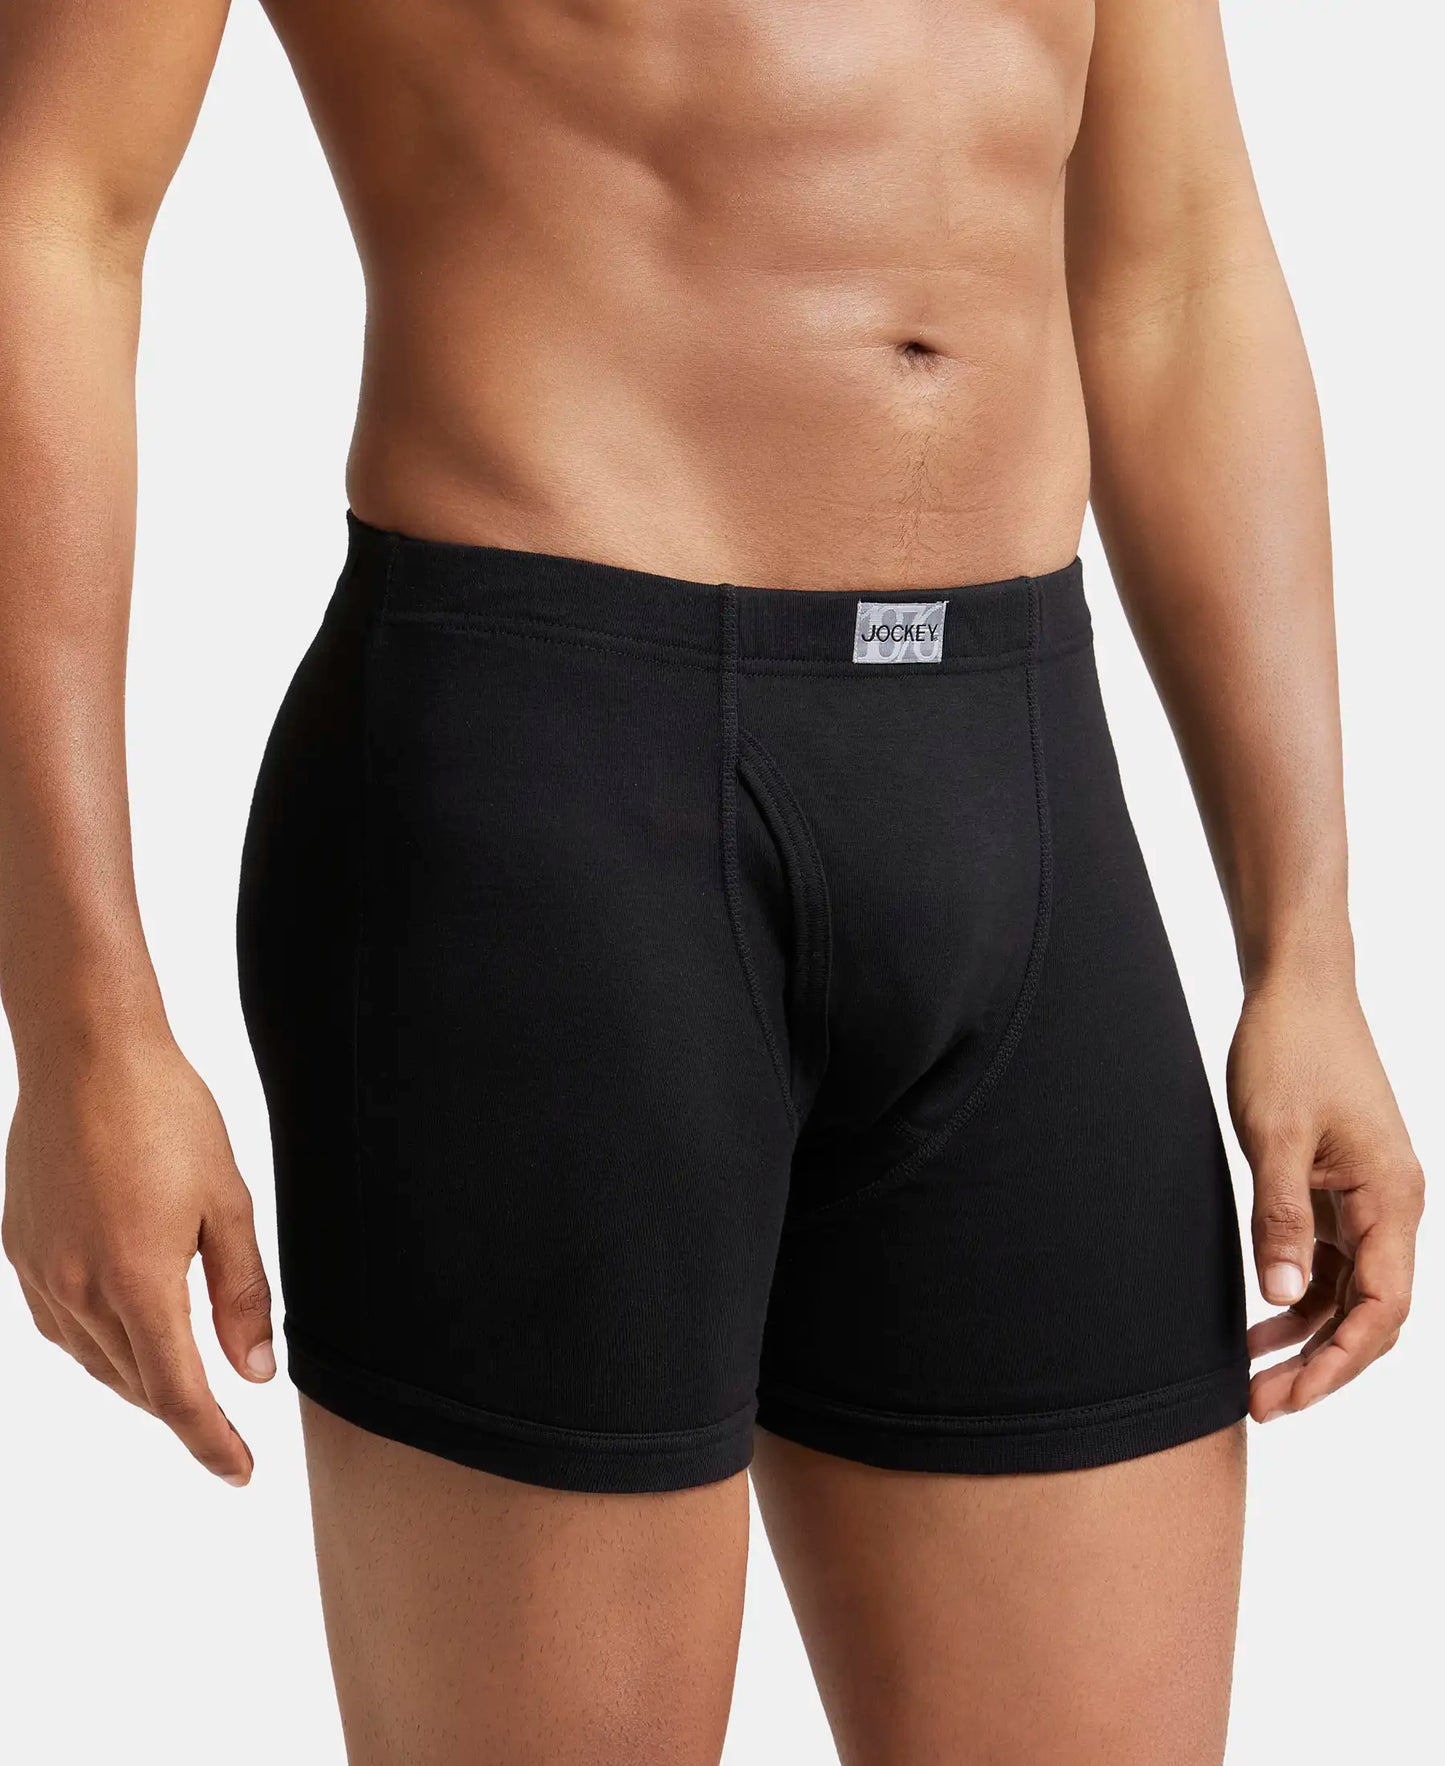 Super Combed Cotton Rib Solid Boxer Brief with Ultrasoft and Durable Waistband - Black/Charcoal Melange/Grey Melange (Pack of 3)-3